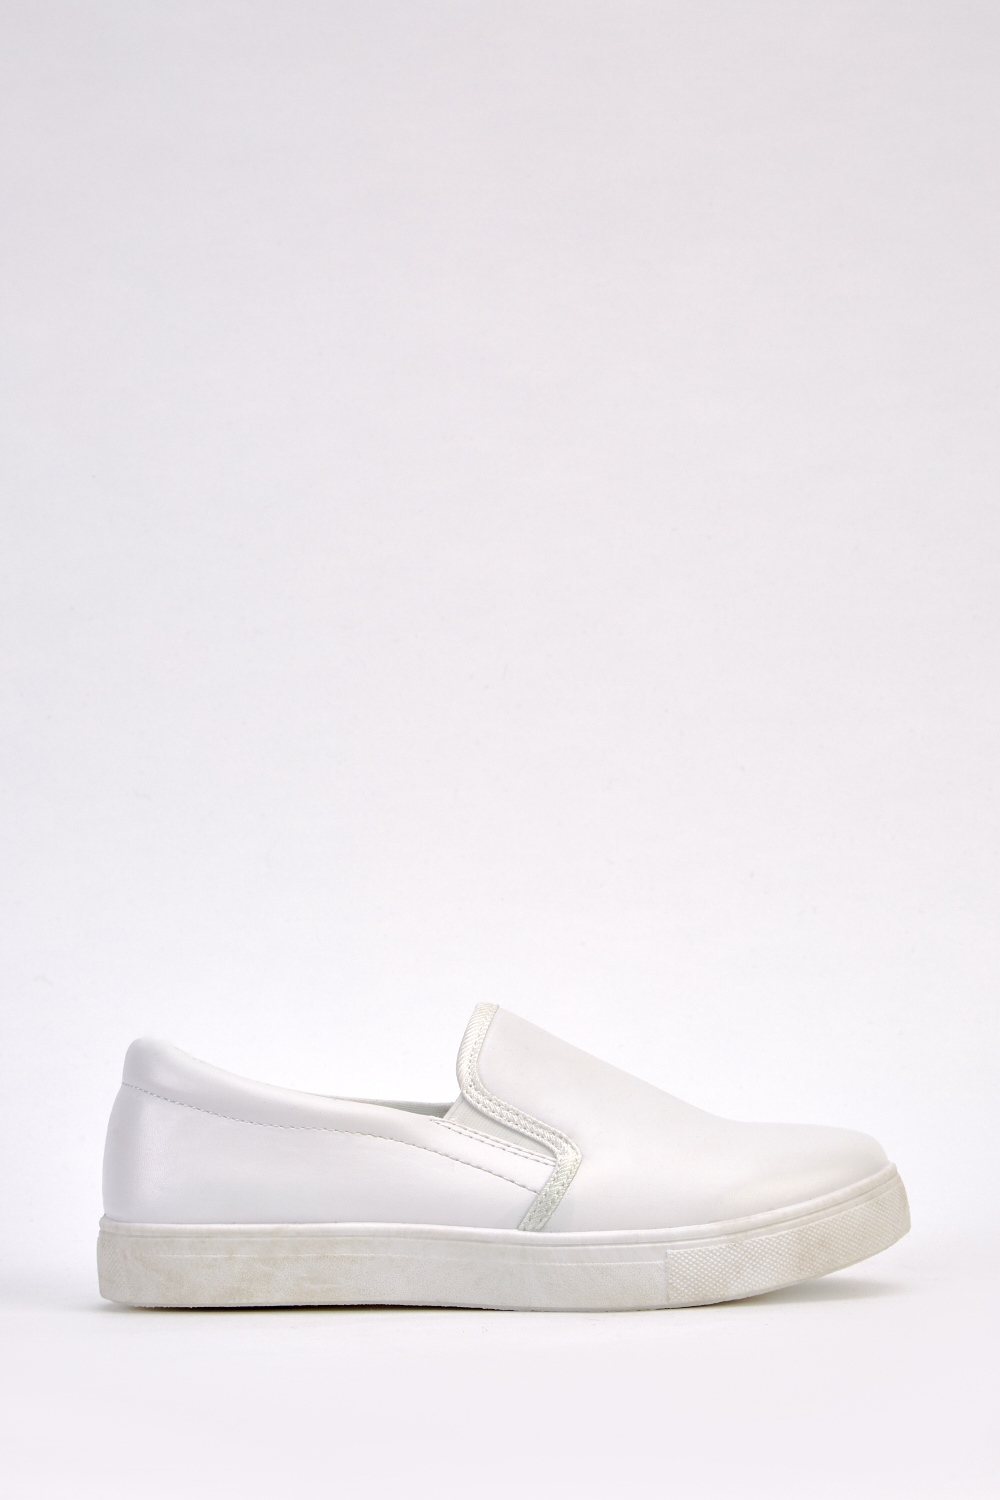 Faux Leather White Plimsolls - Just $6